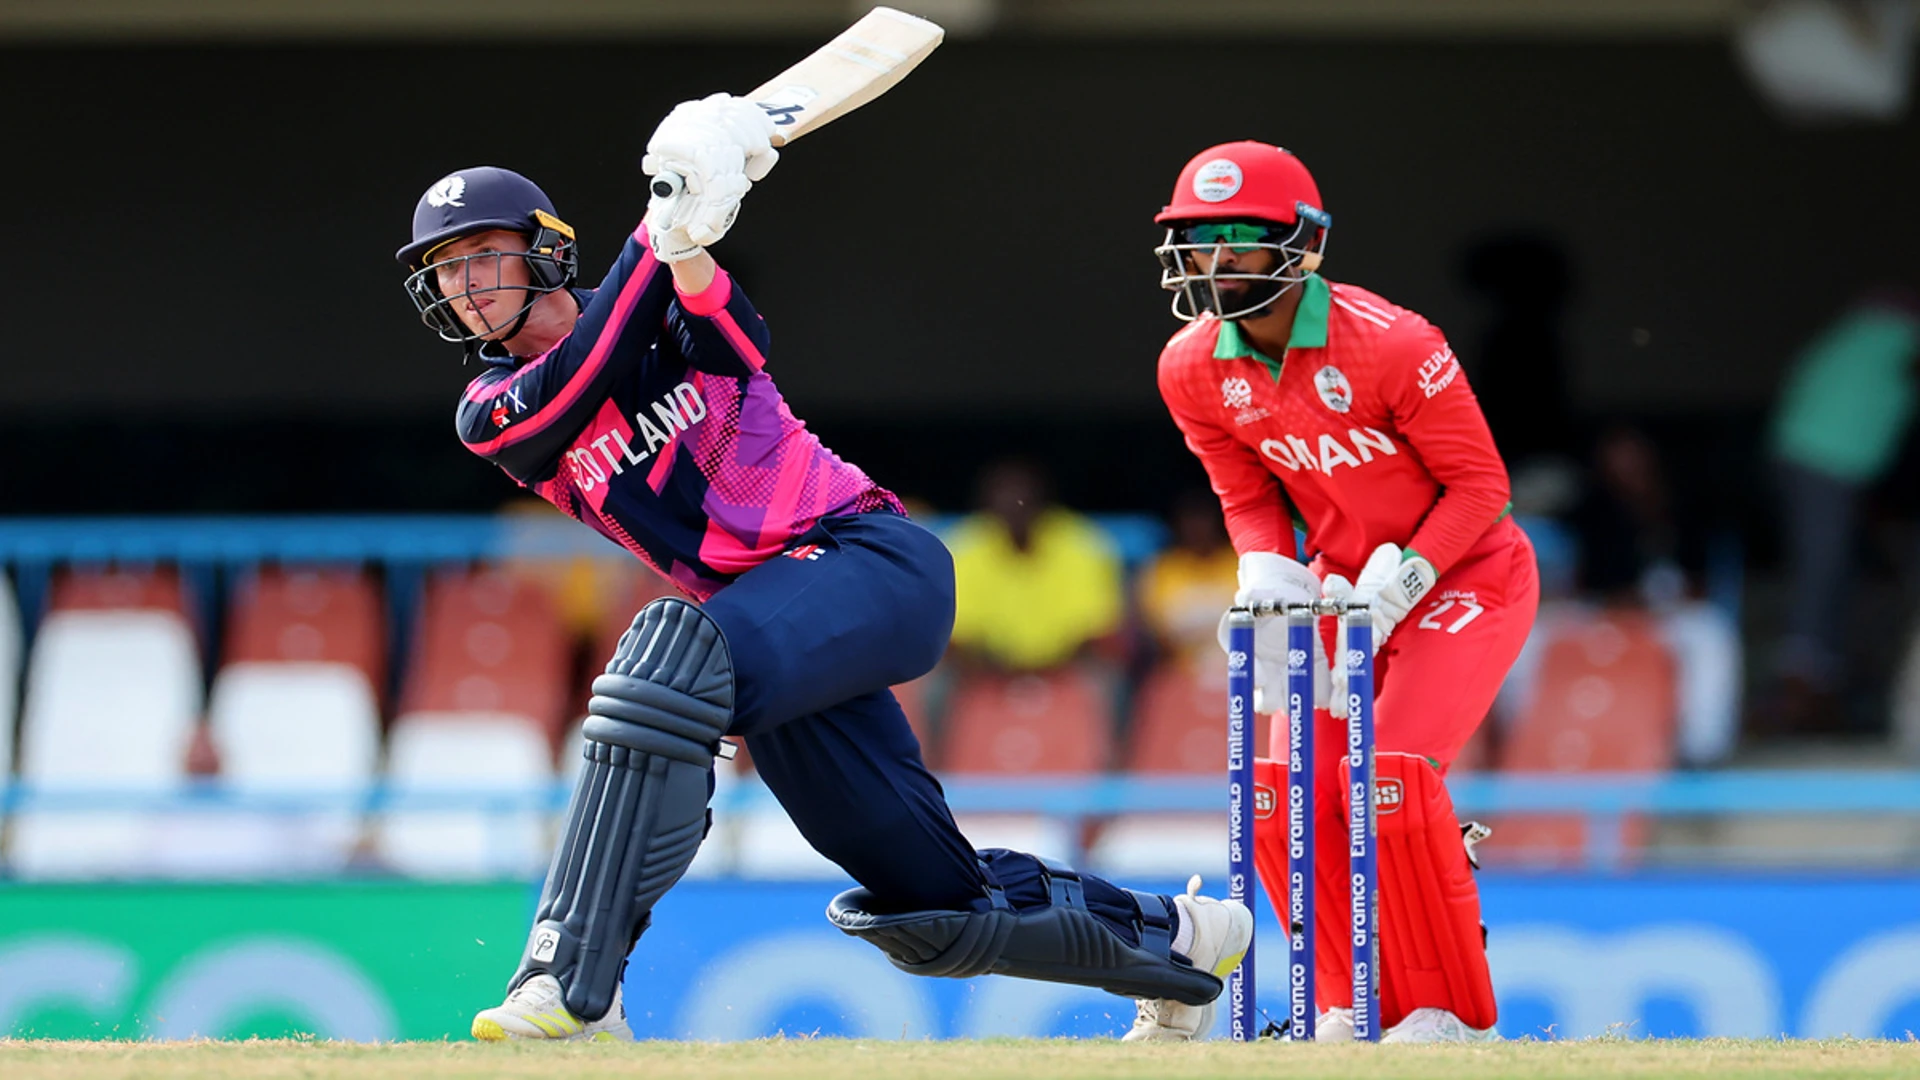 Scotland cruise to victory over Oman at T20 World Cup